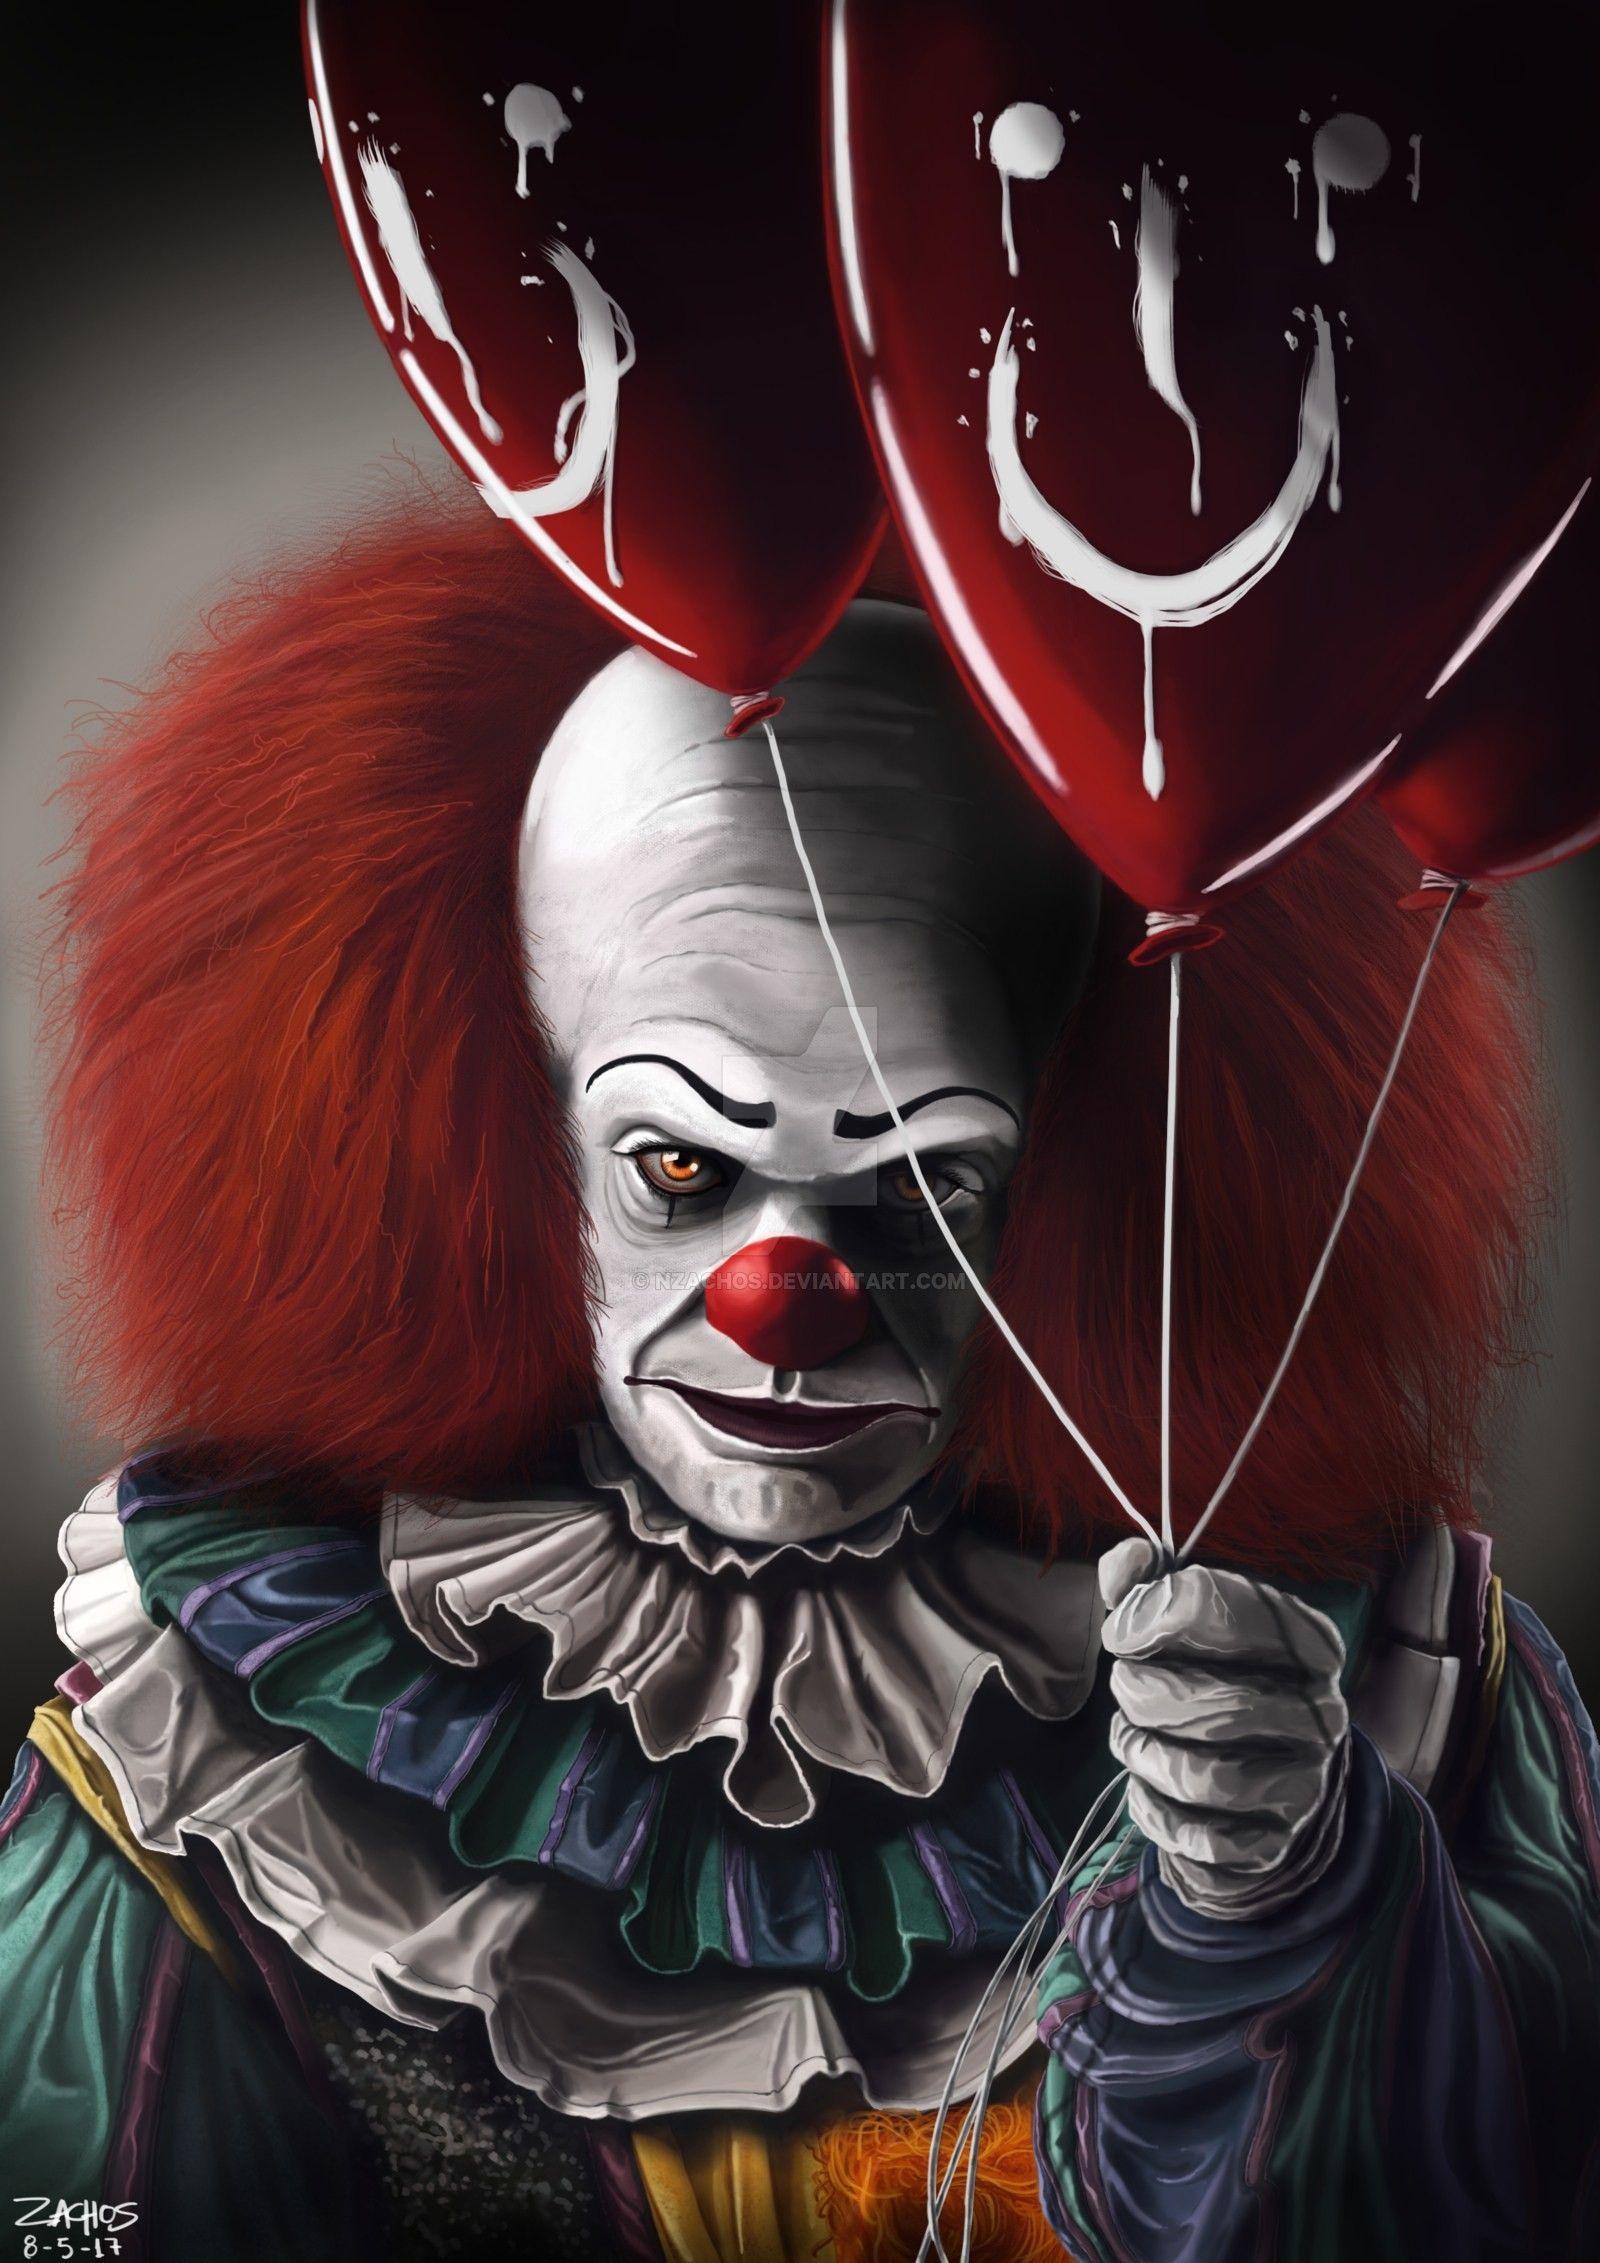 1990 Pennywise Wallpapers - Top Free